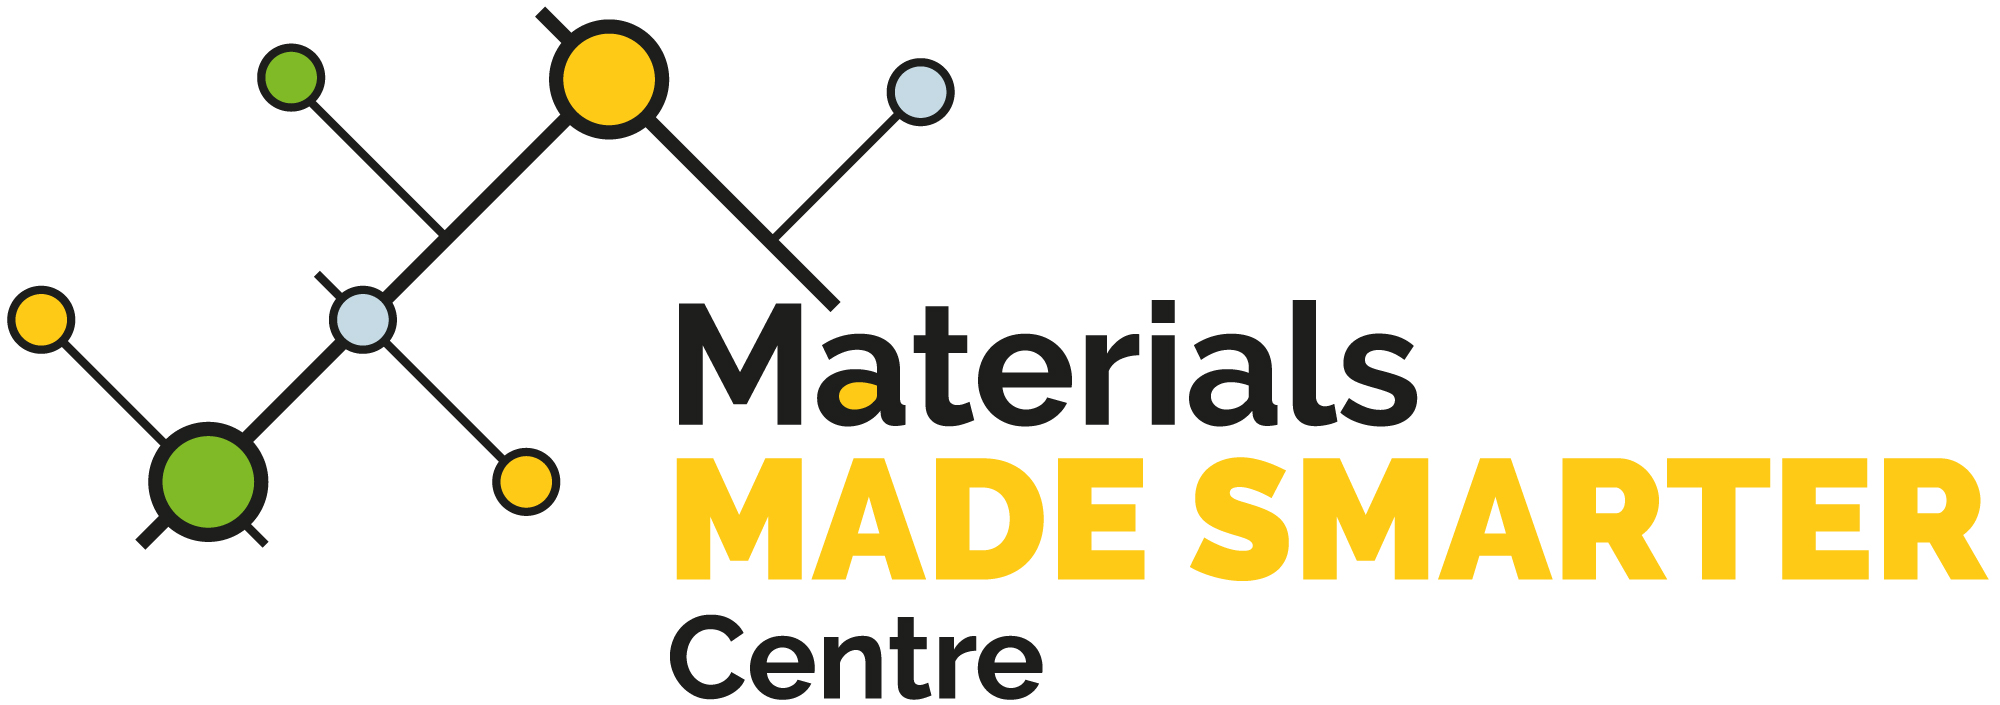 New centre will bring together leading researchers in materials, advanced manufacturing, modelling, physical computing, psychology and management across the whole materials manufacturing value chain.